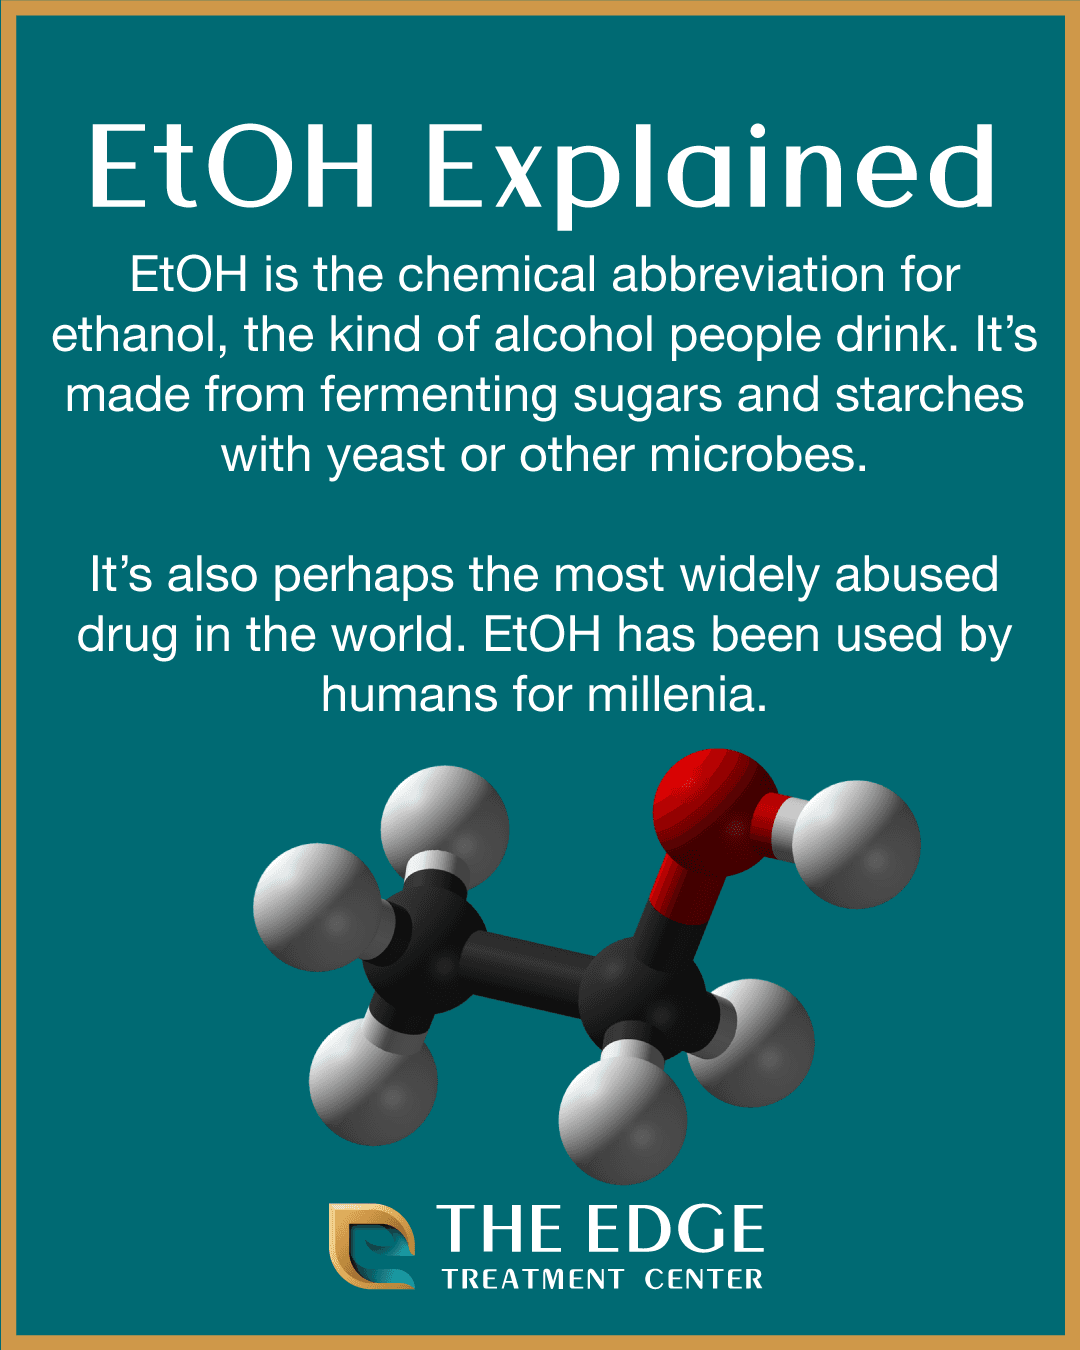 What is EtOH Made From?